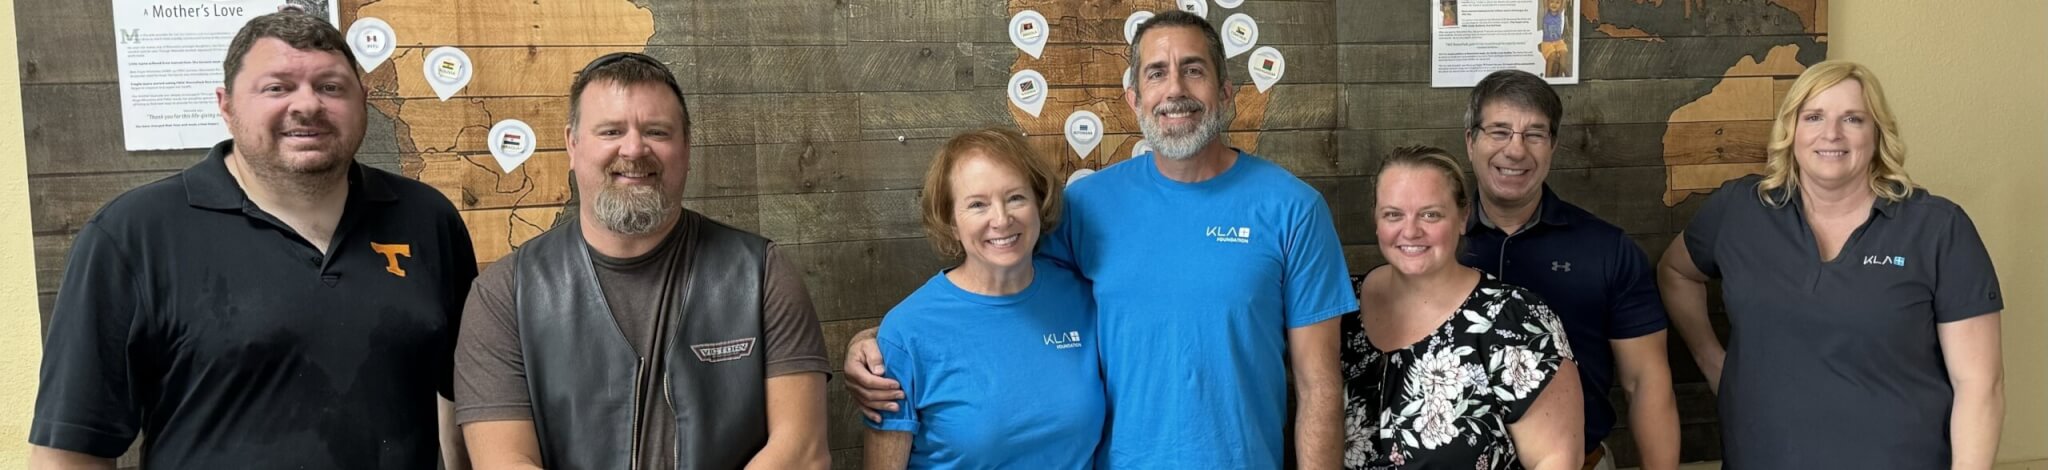 Image of employees in Arizona volunteering for Feed My Starving Children.